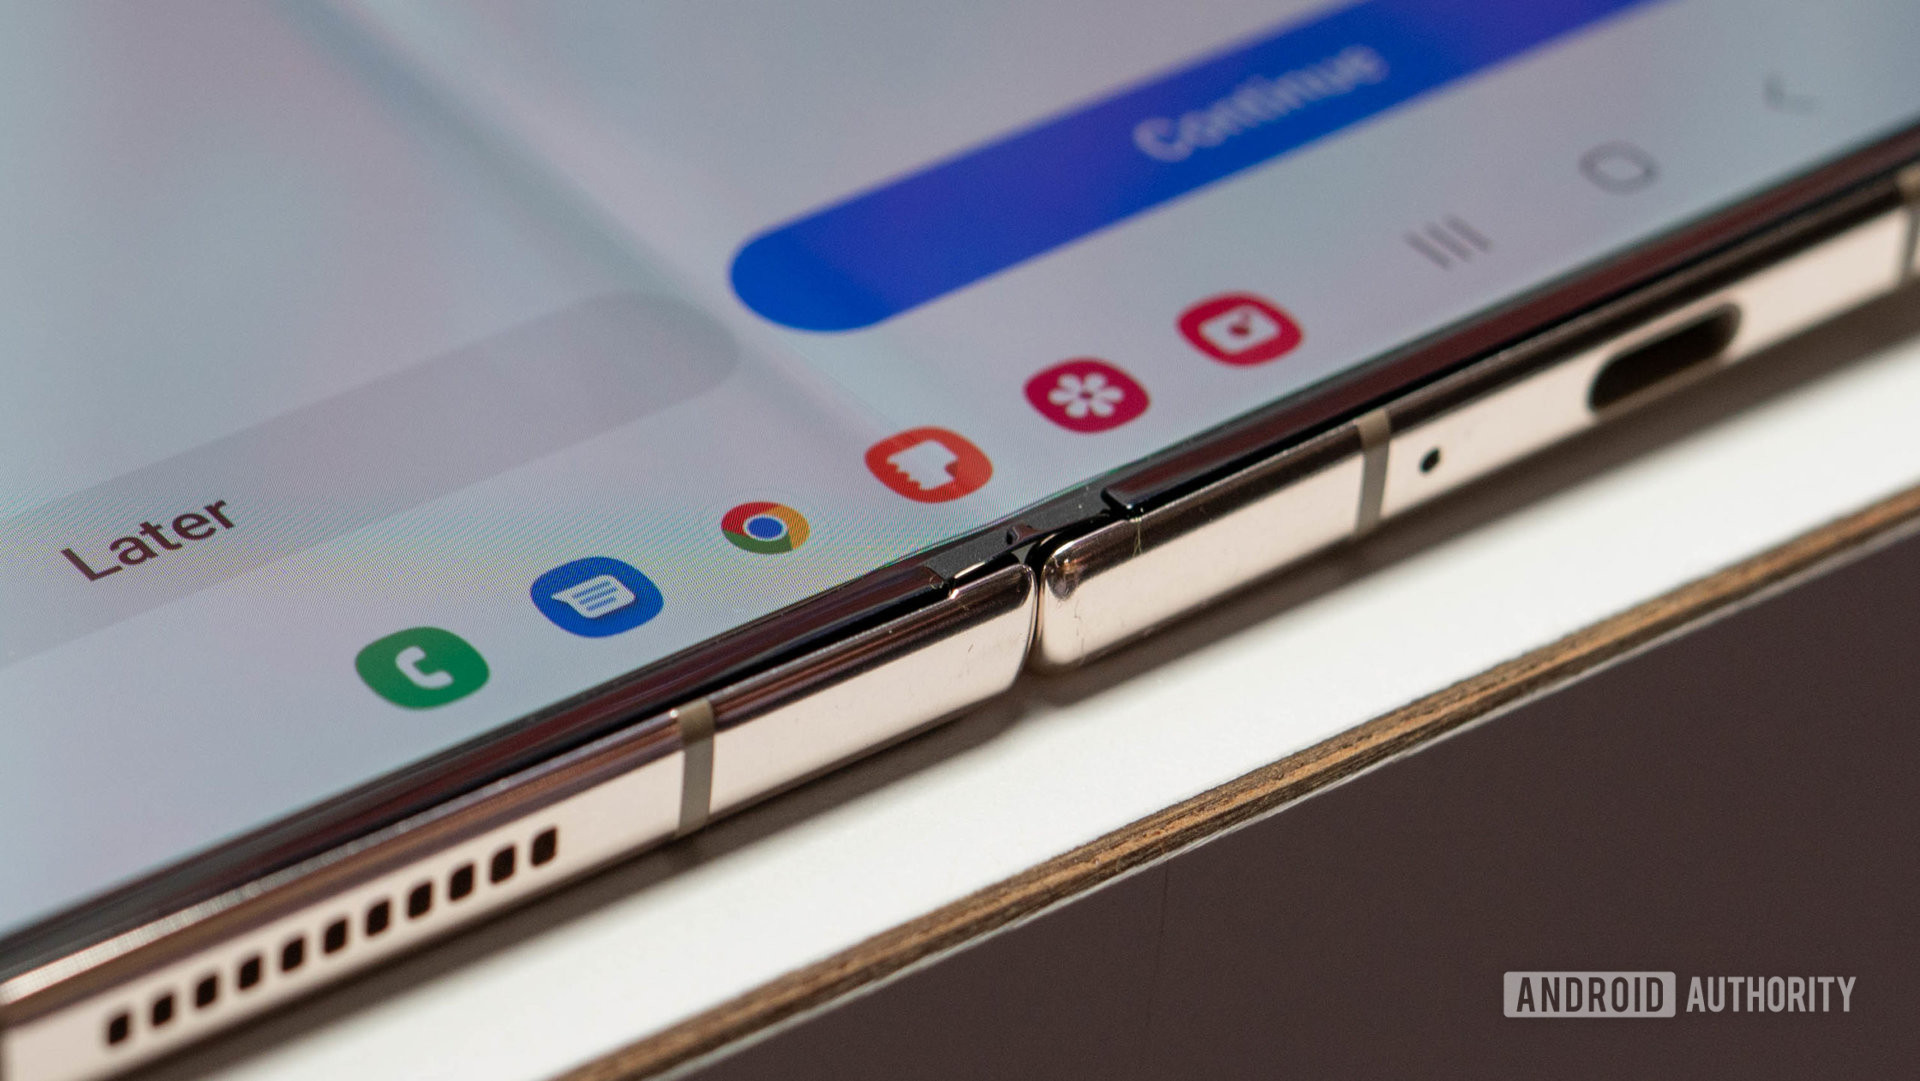 Samsung Galaxy Z Fold 4 open lying on a table showing hinge detail and app dock task bar